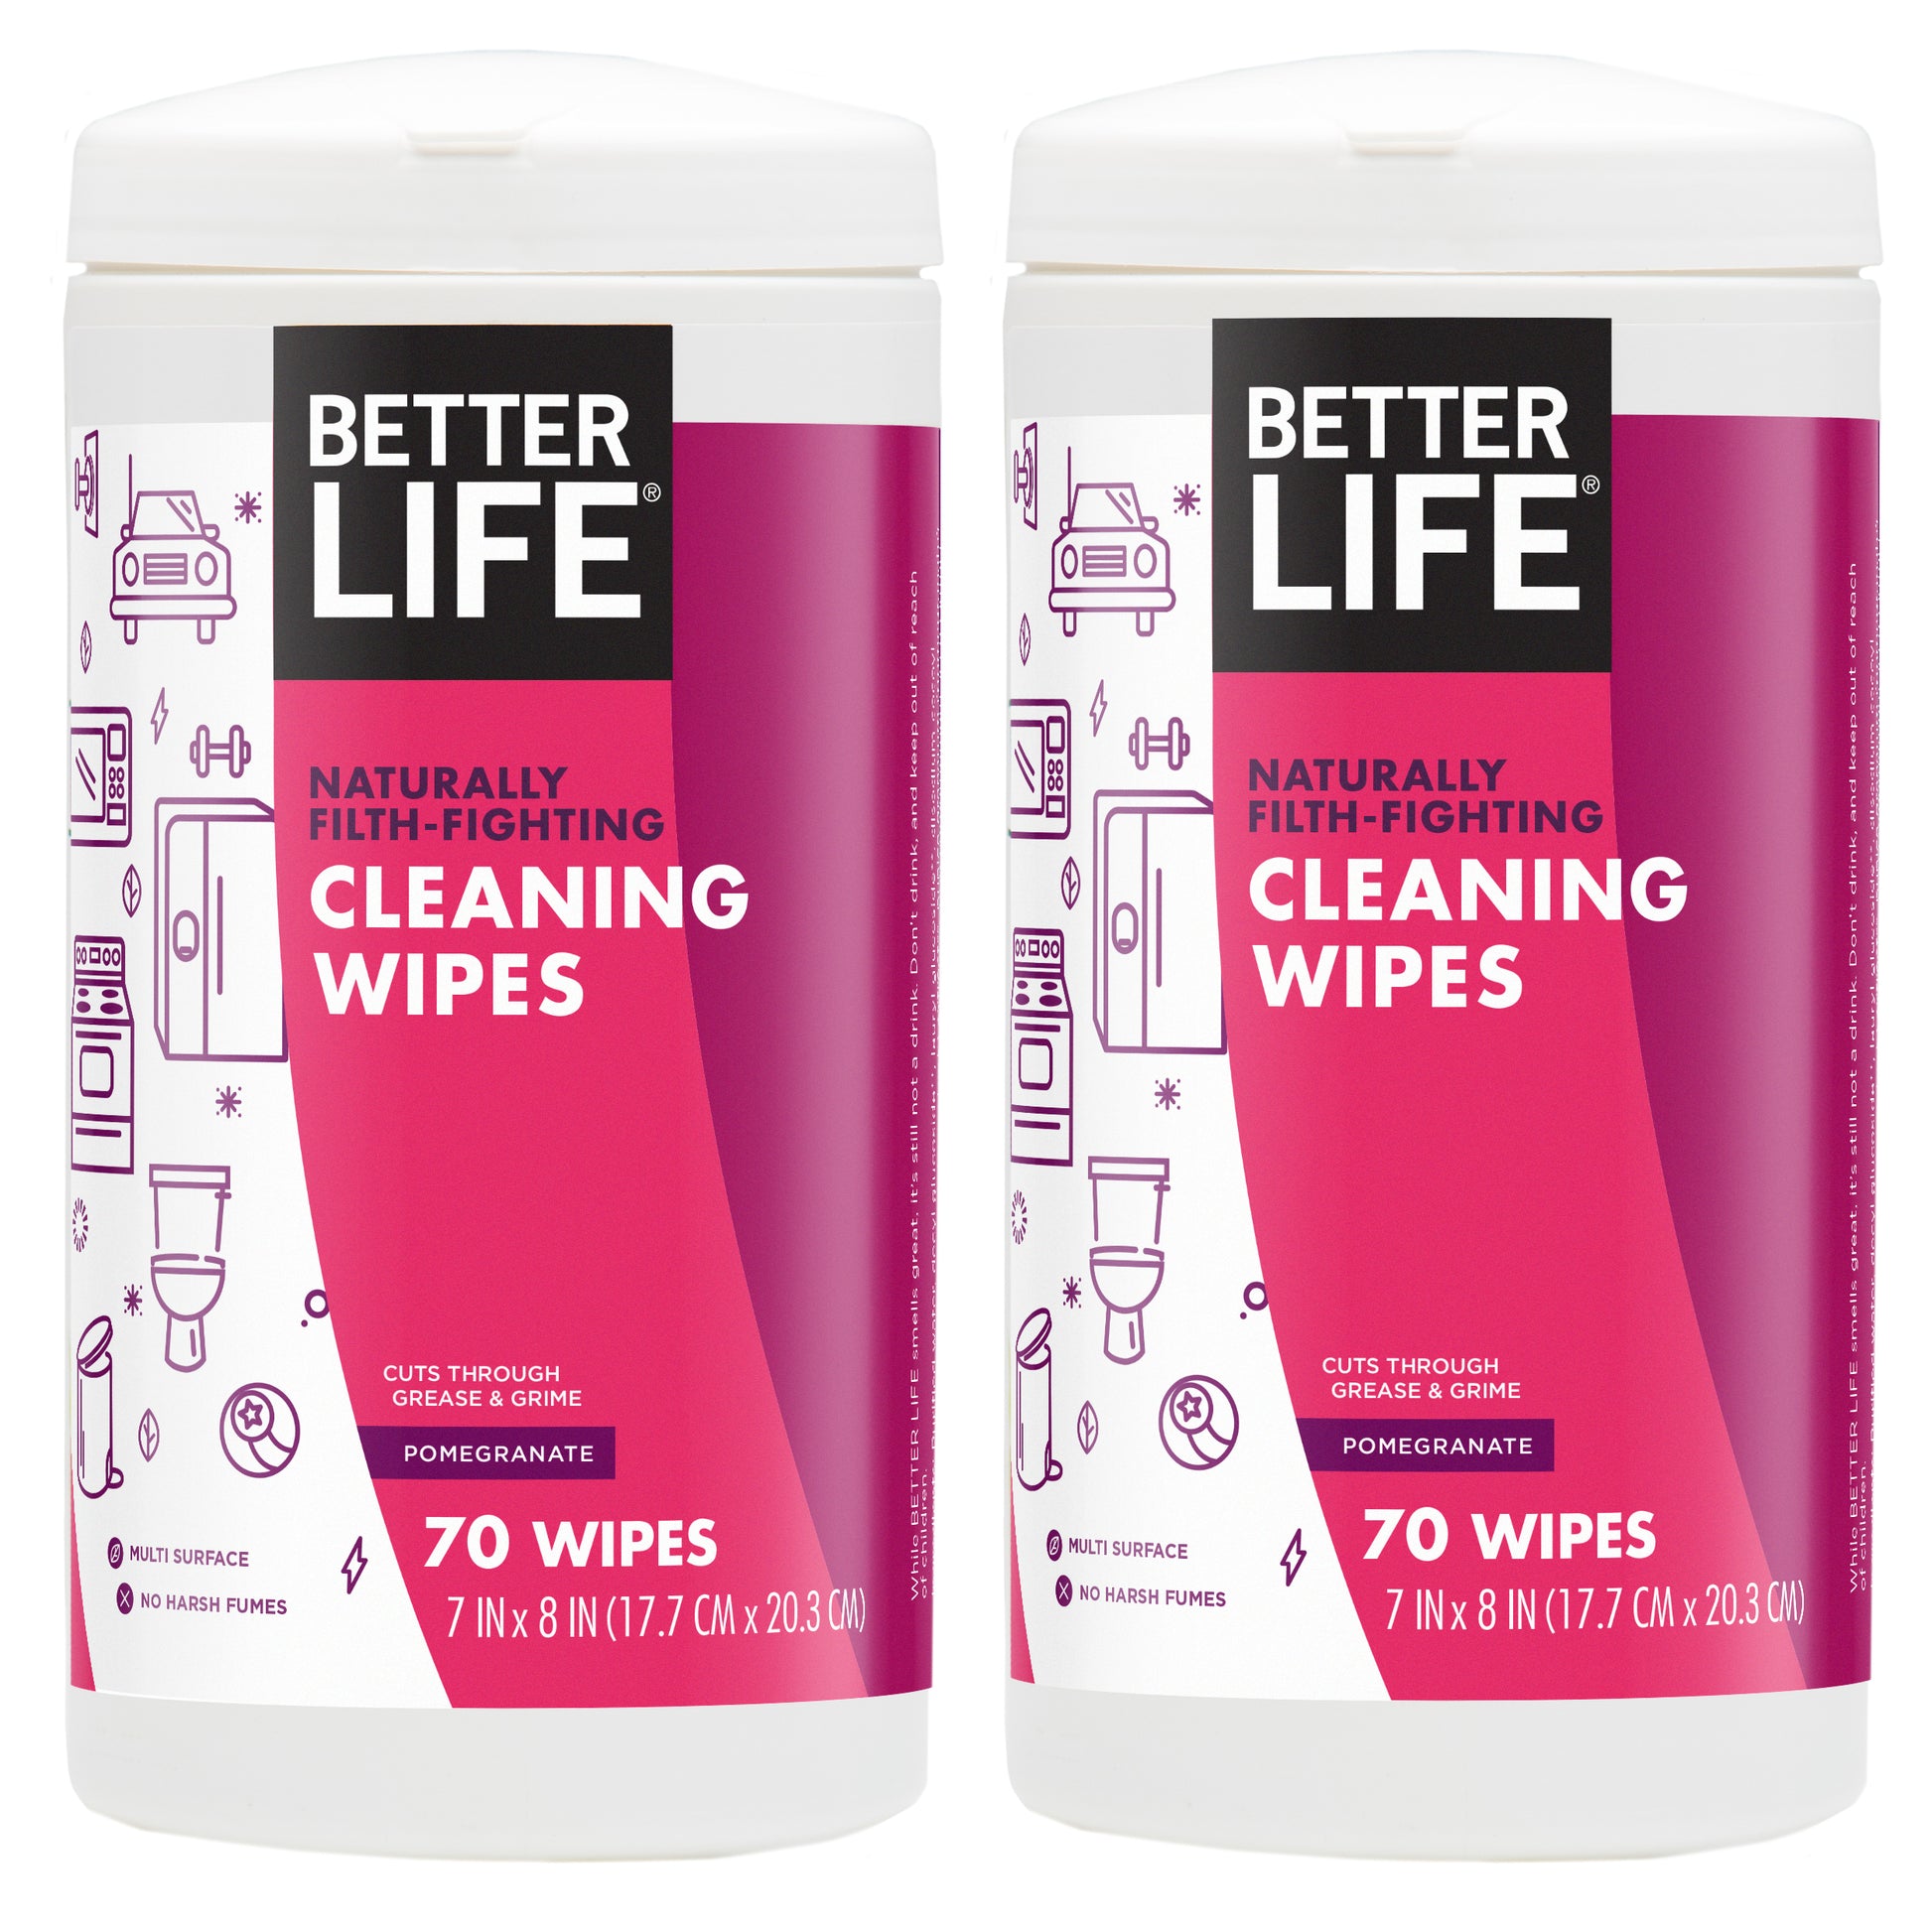 All Purpose Cleaning Wipes